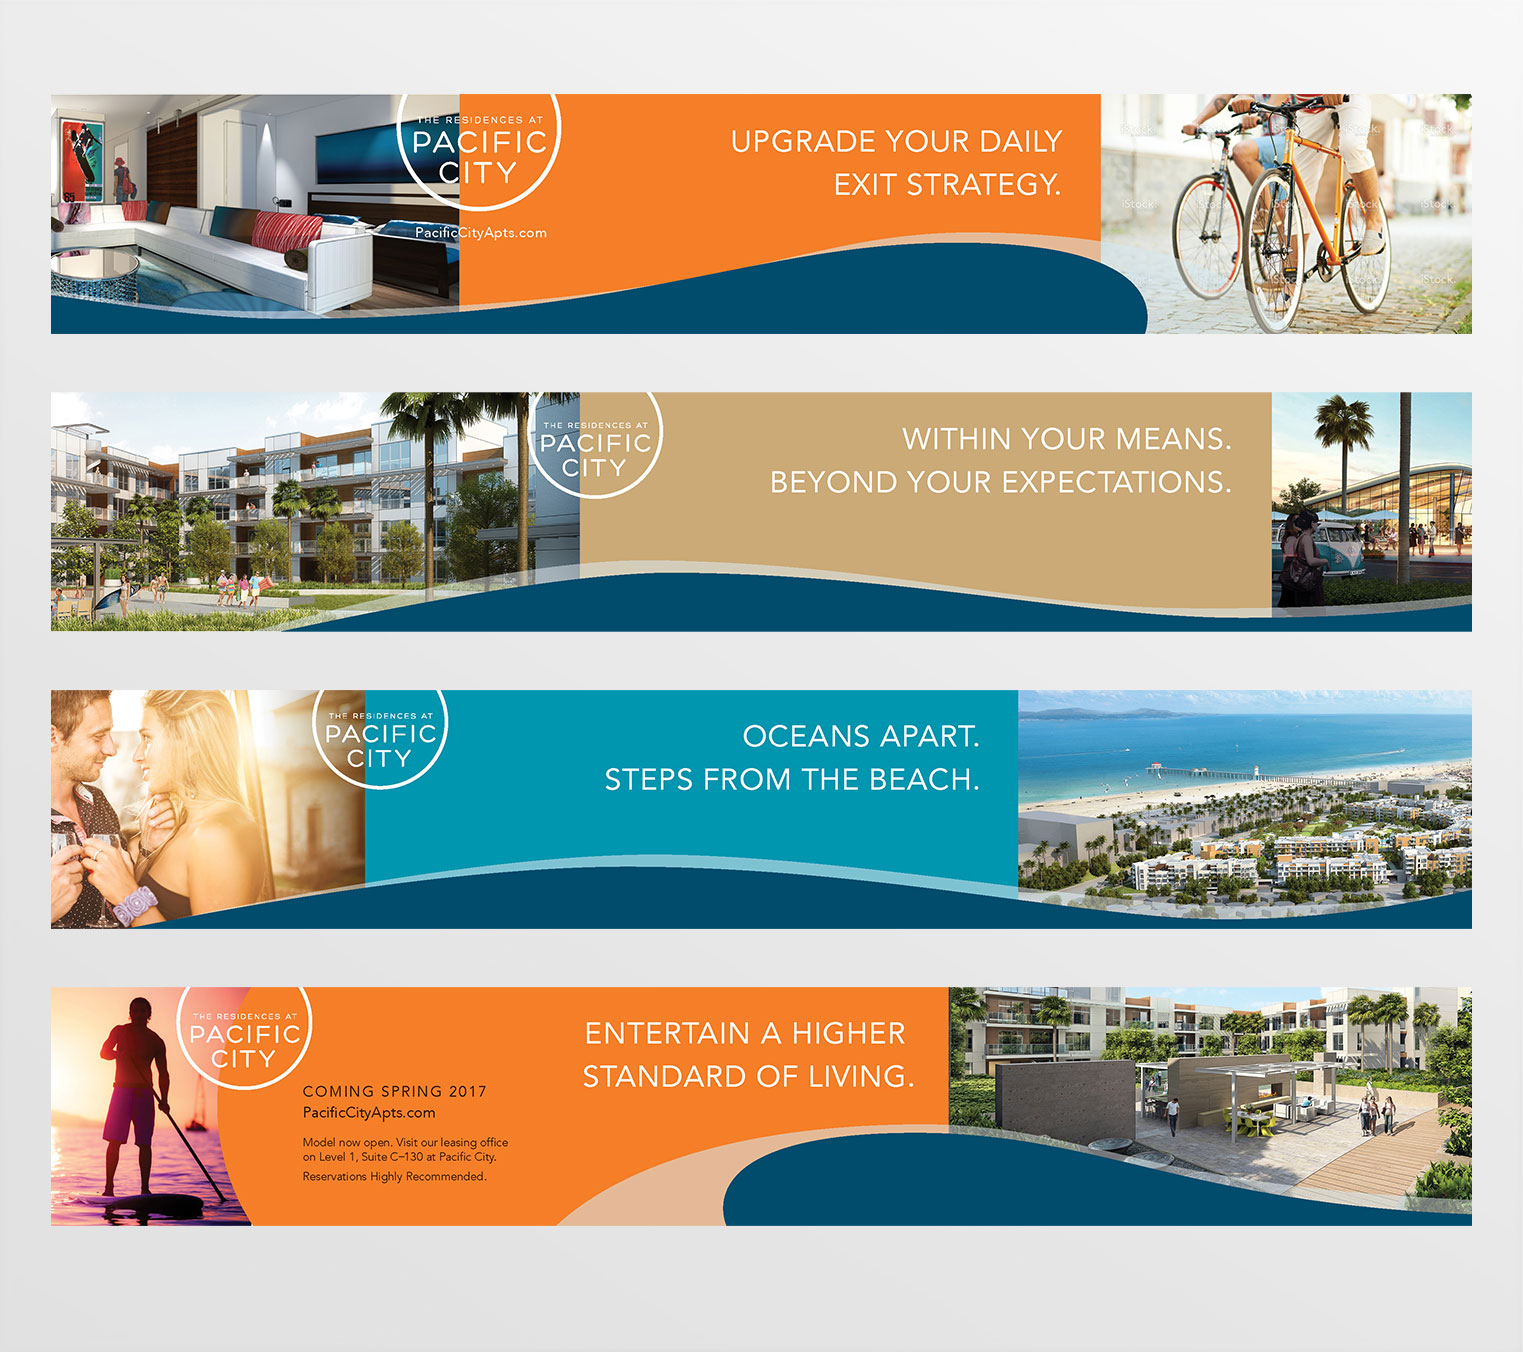 Sections of the OOH marketing fence around the Residences at Pacific City construction site, using Lifestyle photos and copy such as 